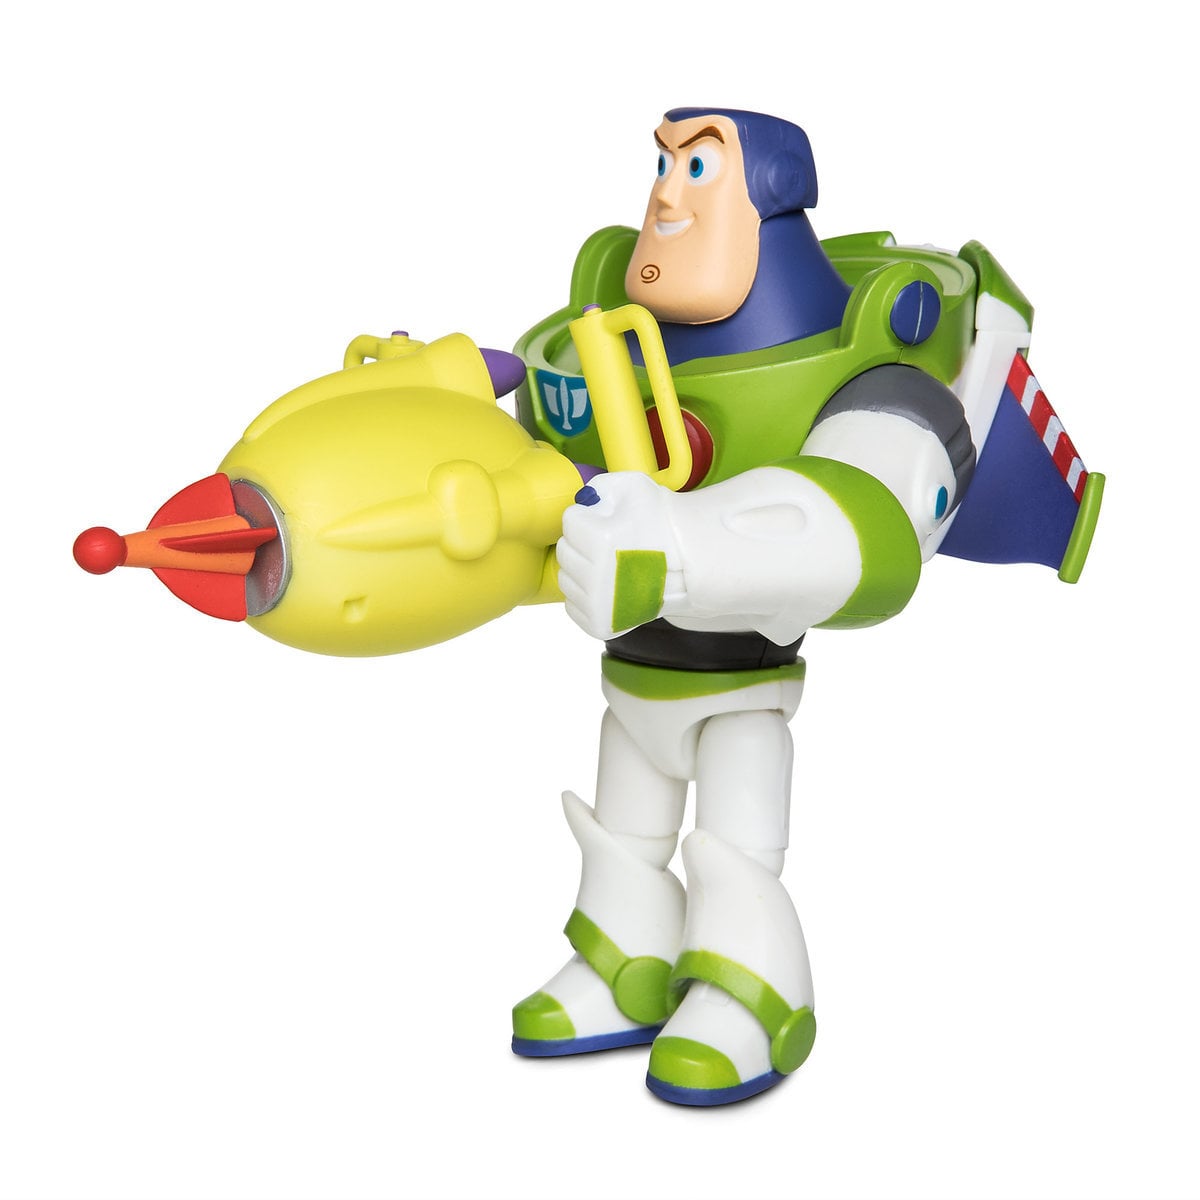 Disney Toy Story 4 Buzz Lightyear Action Figure Toybox New with Box